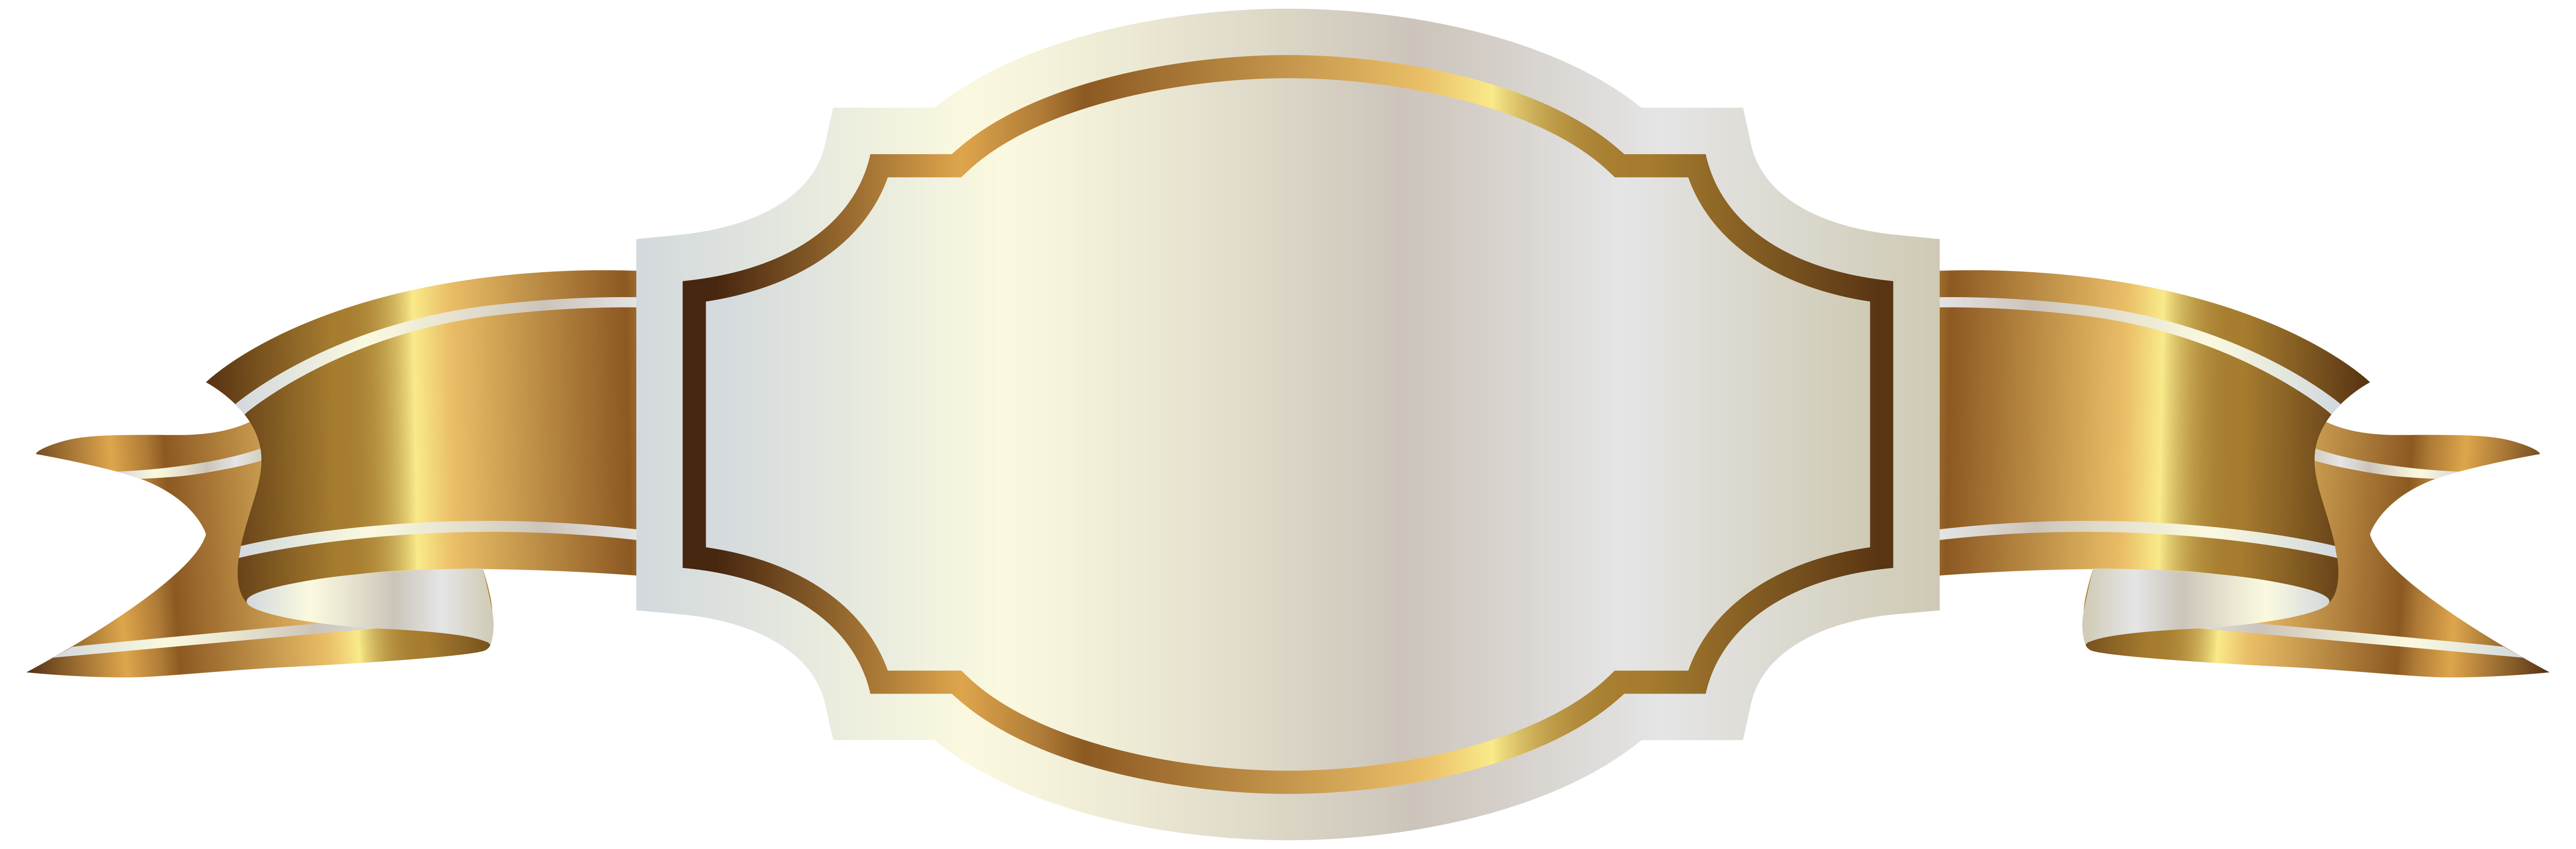 Golden Banner With White Label icons